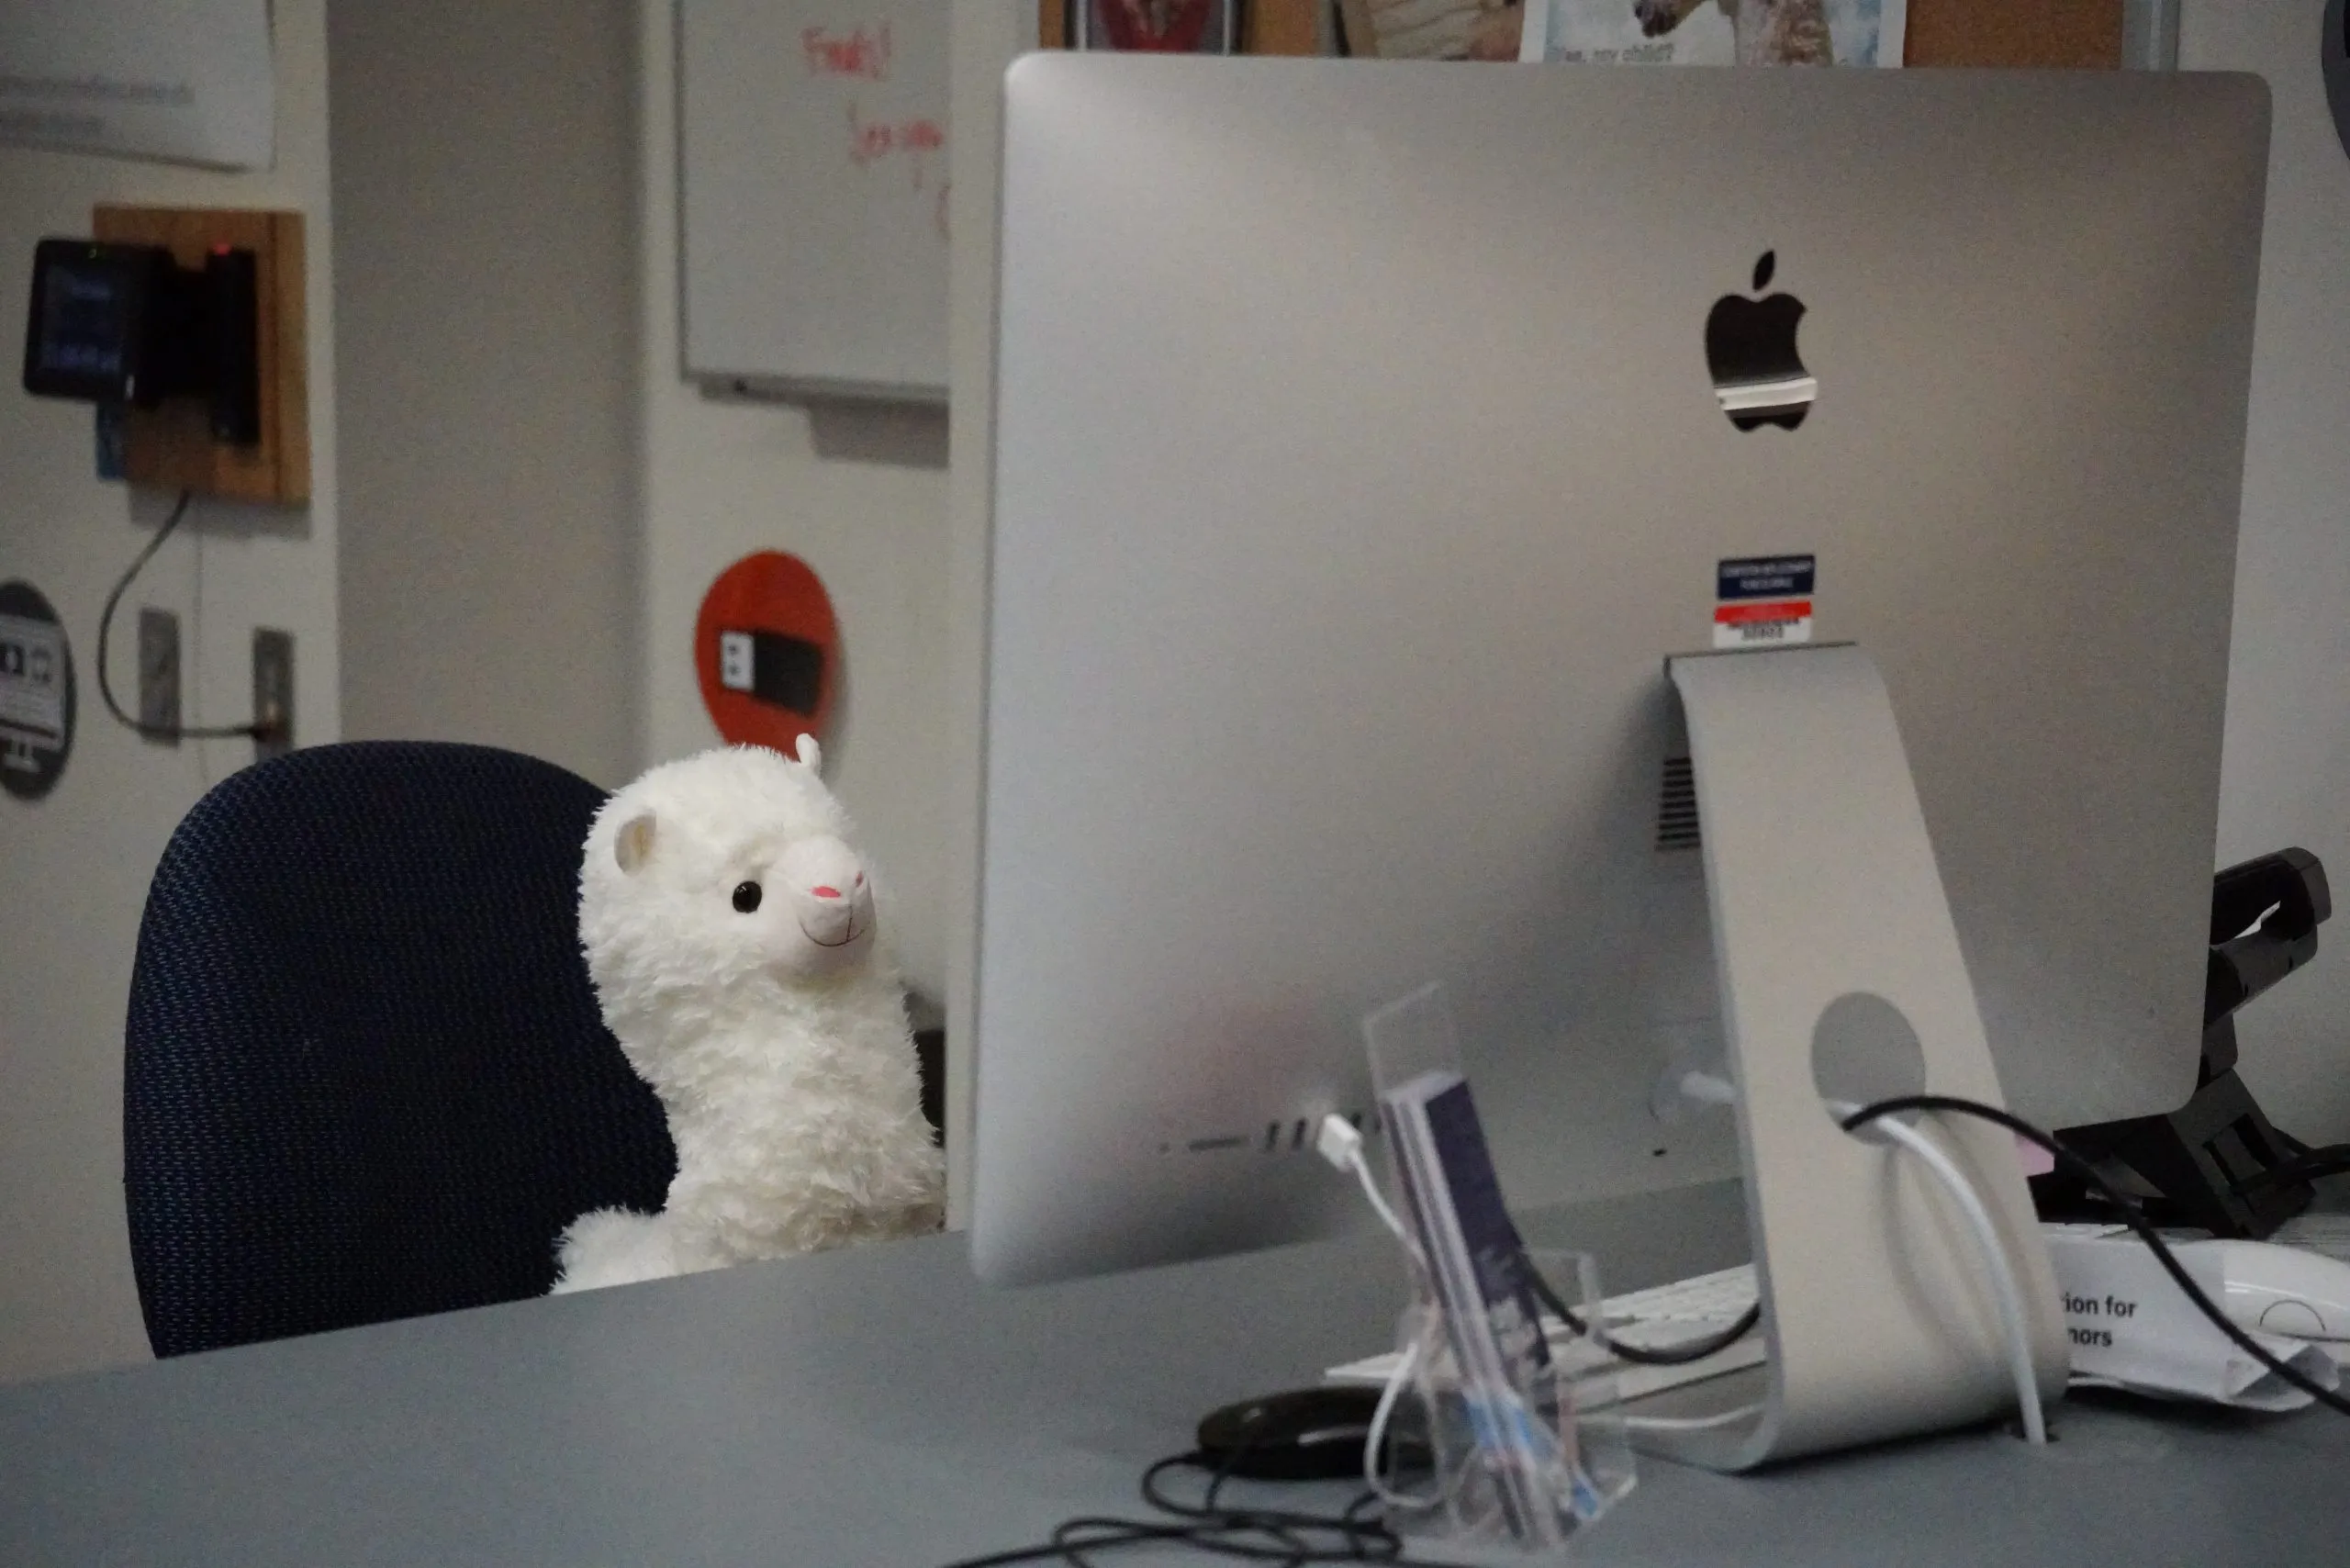 A plush llama sitting behind the front desk of the DRC